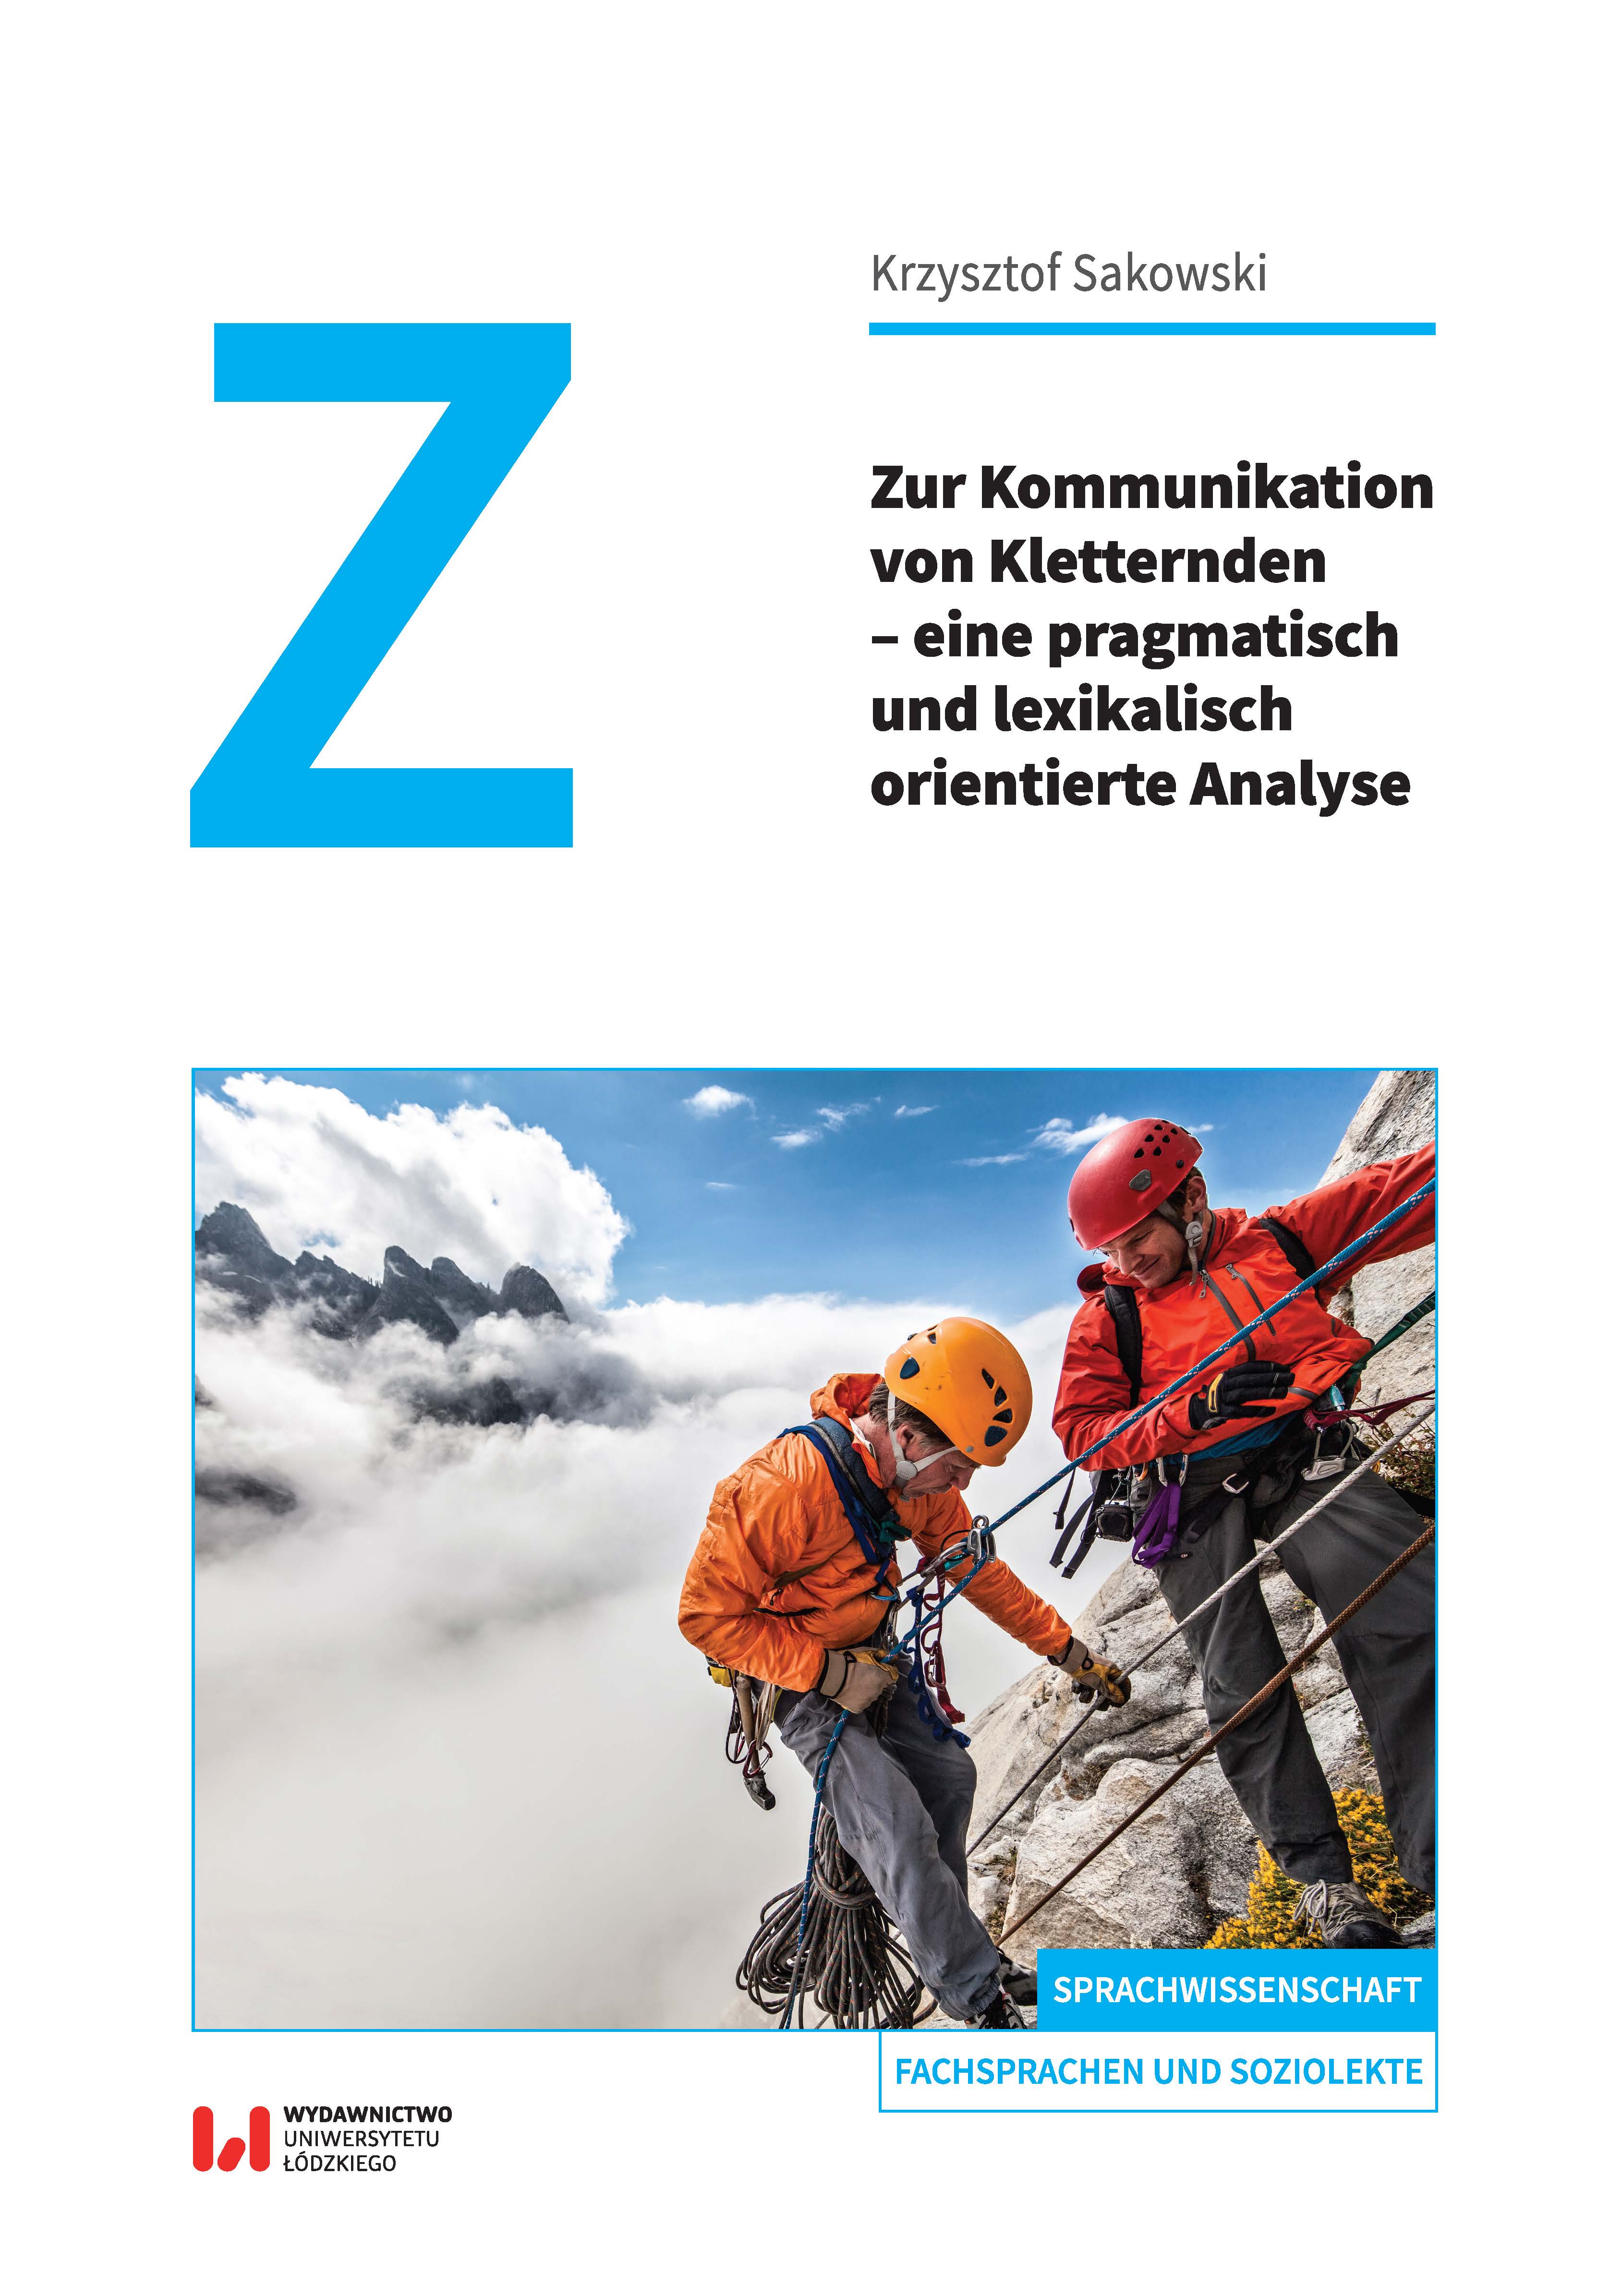 Communication of climbers – pragmatic and lexical analysis